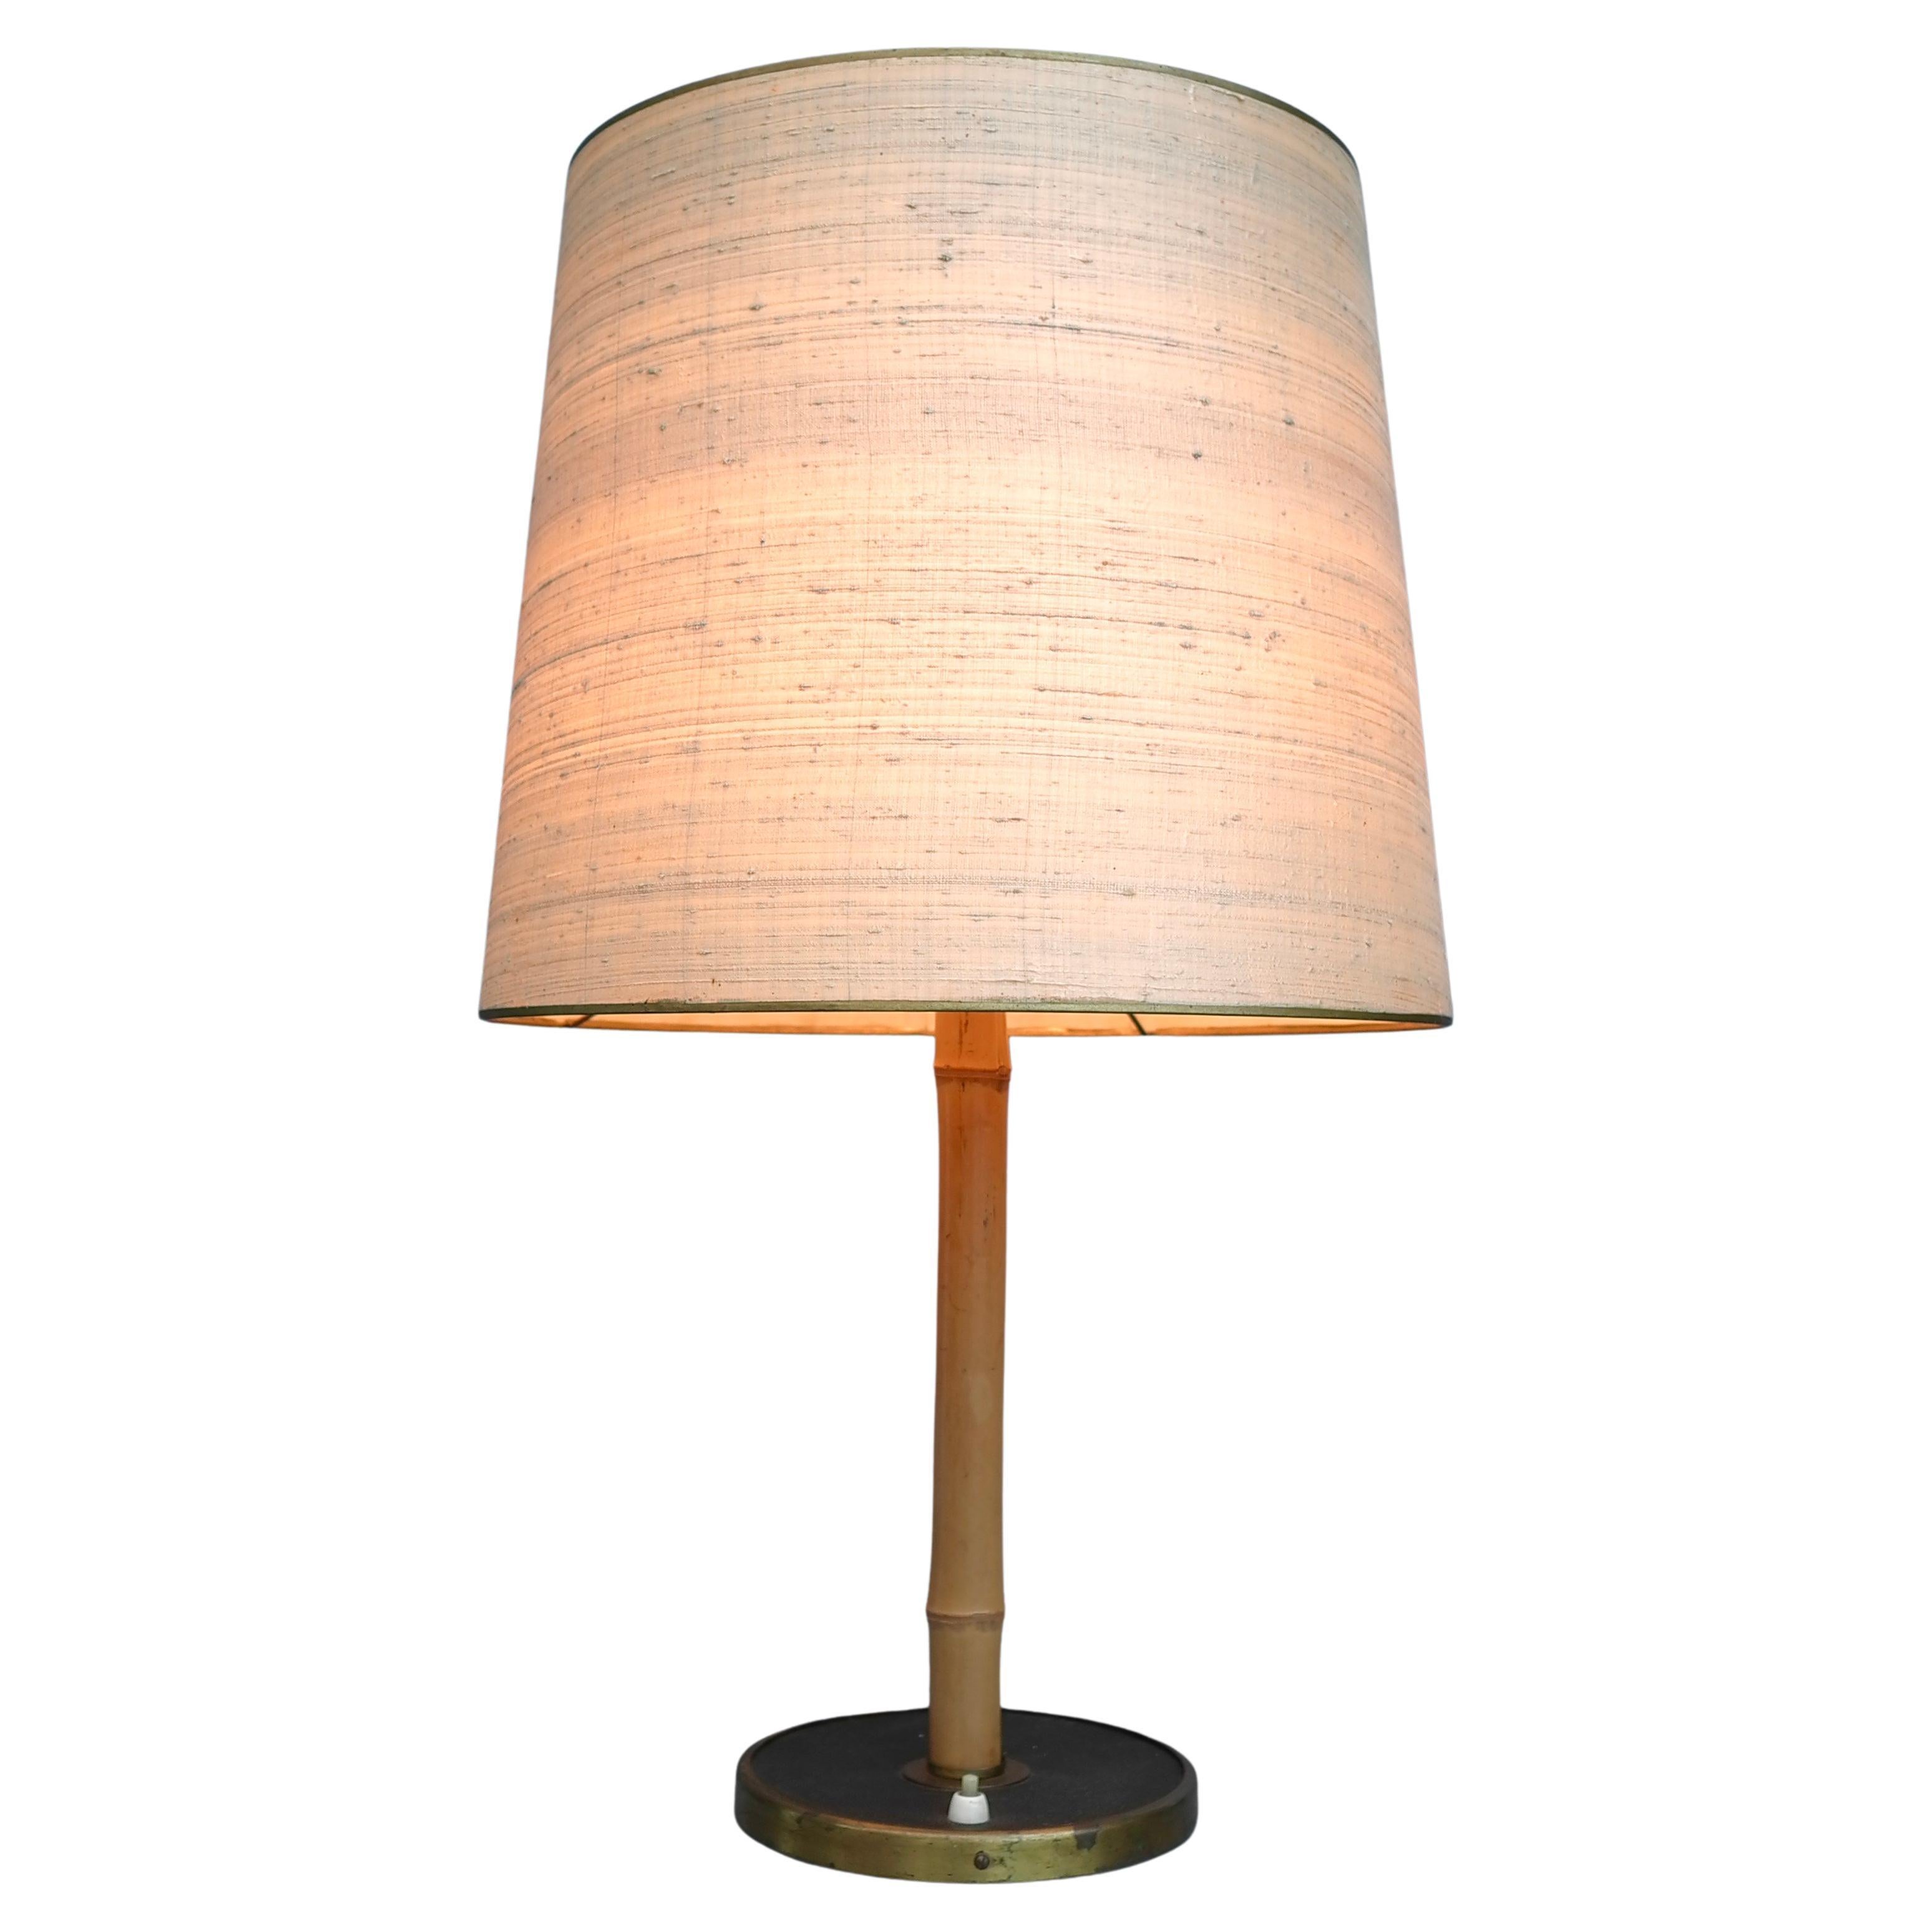 Bamboo and Brass Table Lamp with Silk Shade, Austria 1950's For Sale